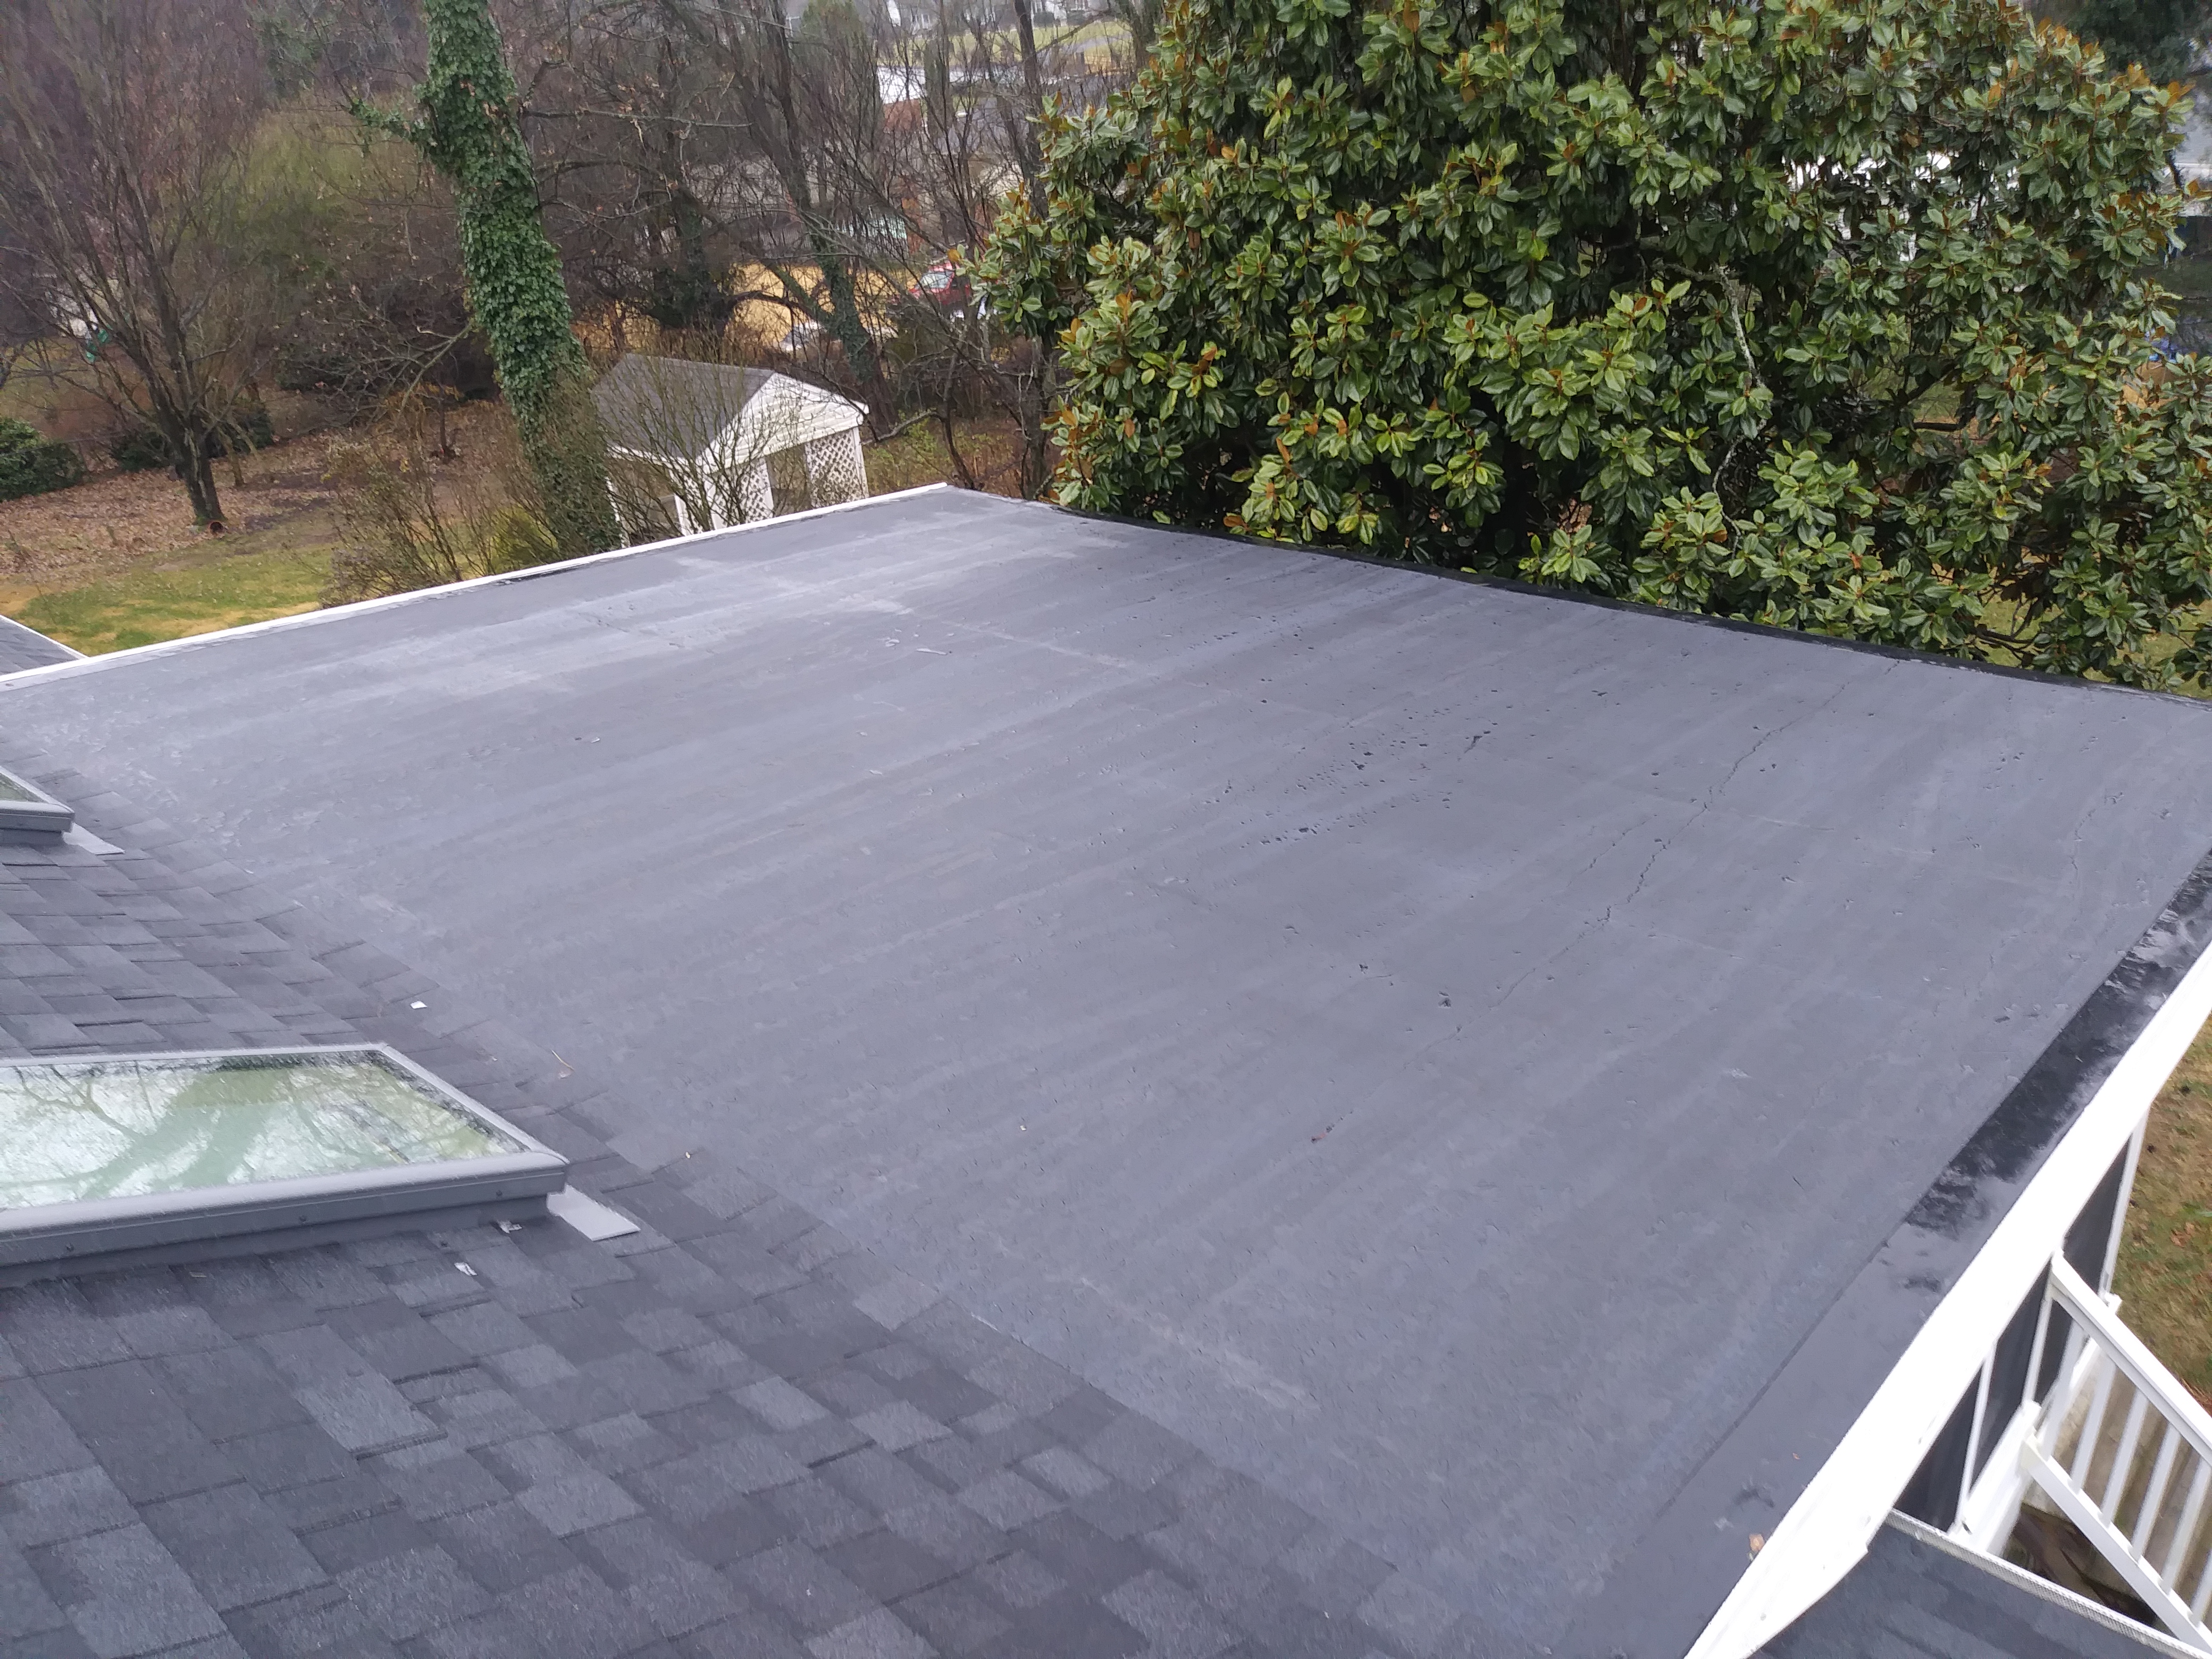 A new rubber roof installed over a sun room